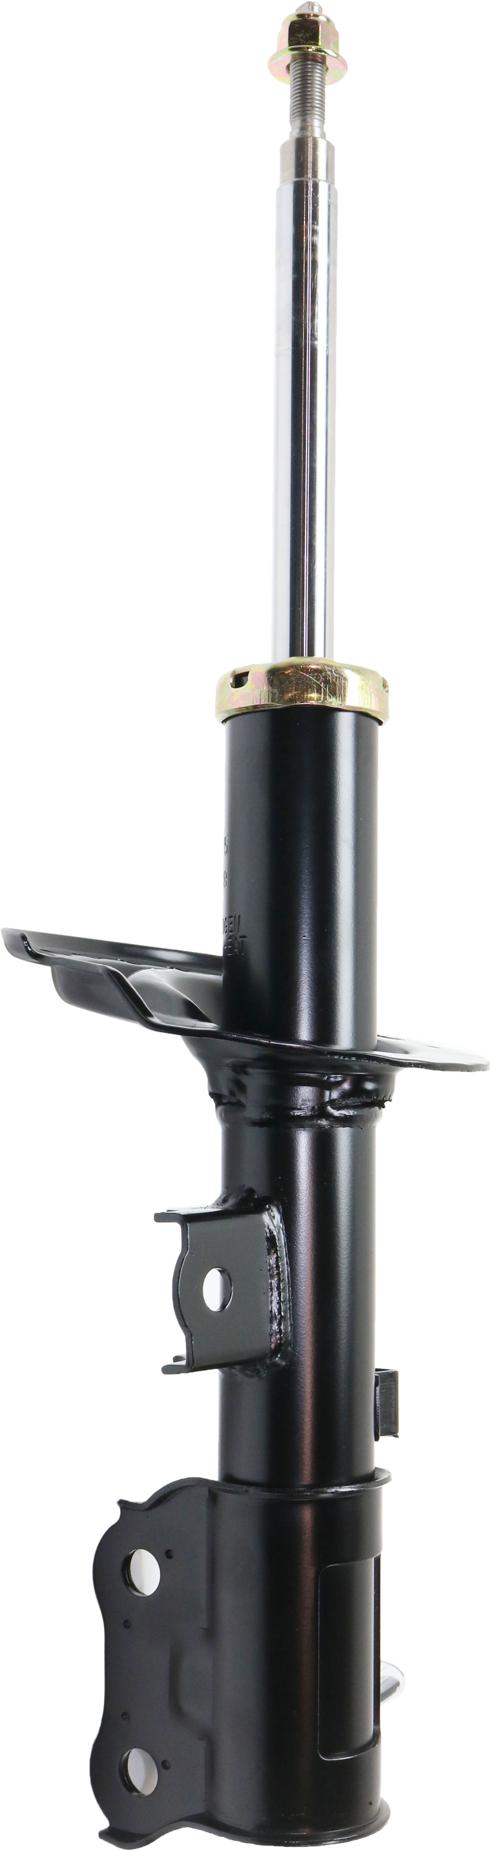 Shock Absorber And Strut Assembly Right Single Black - TrueDrive 2012-2015 Accent 4 Cyl 1.6L